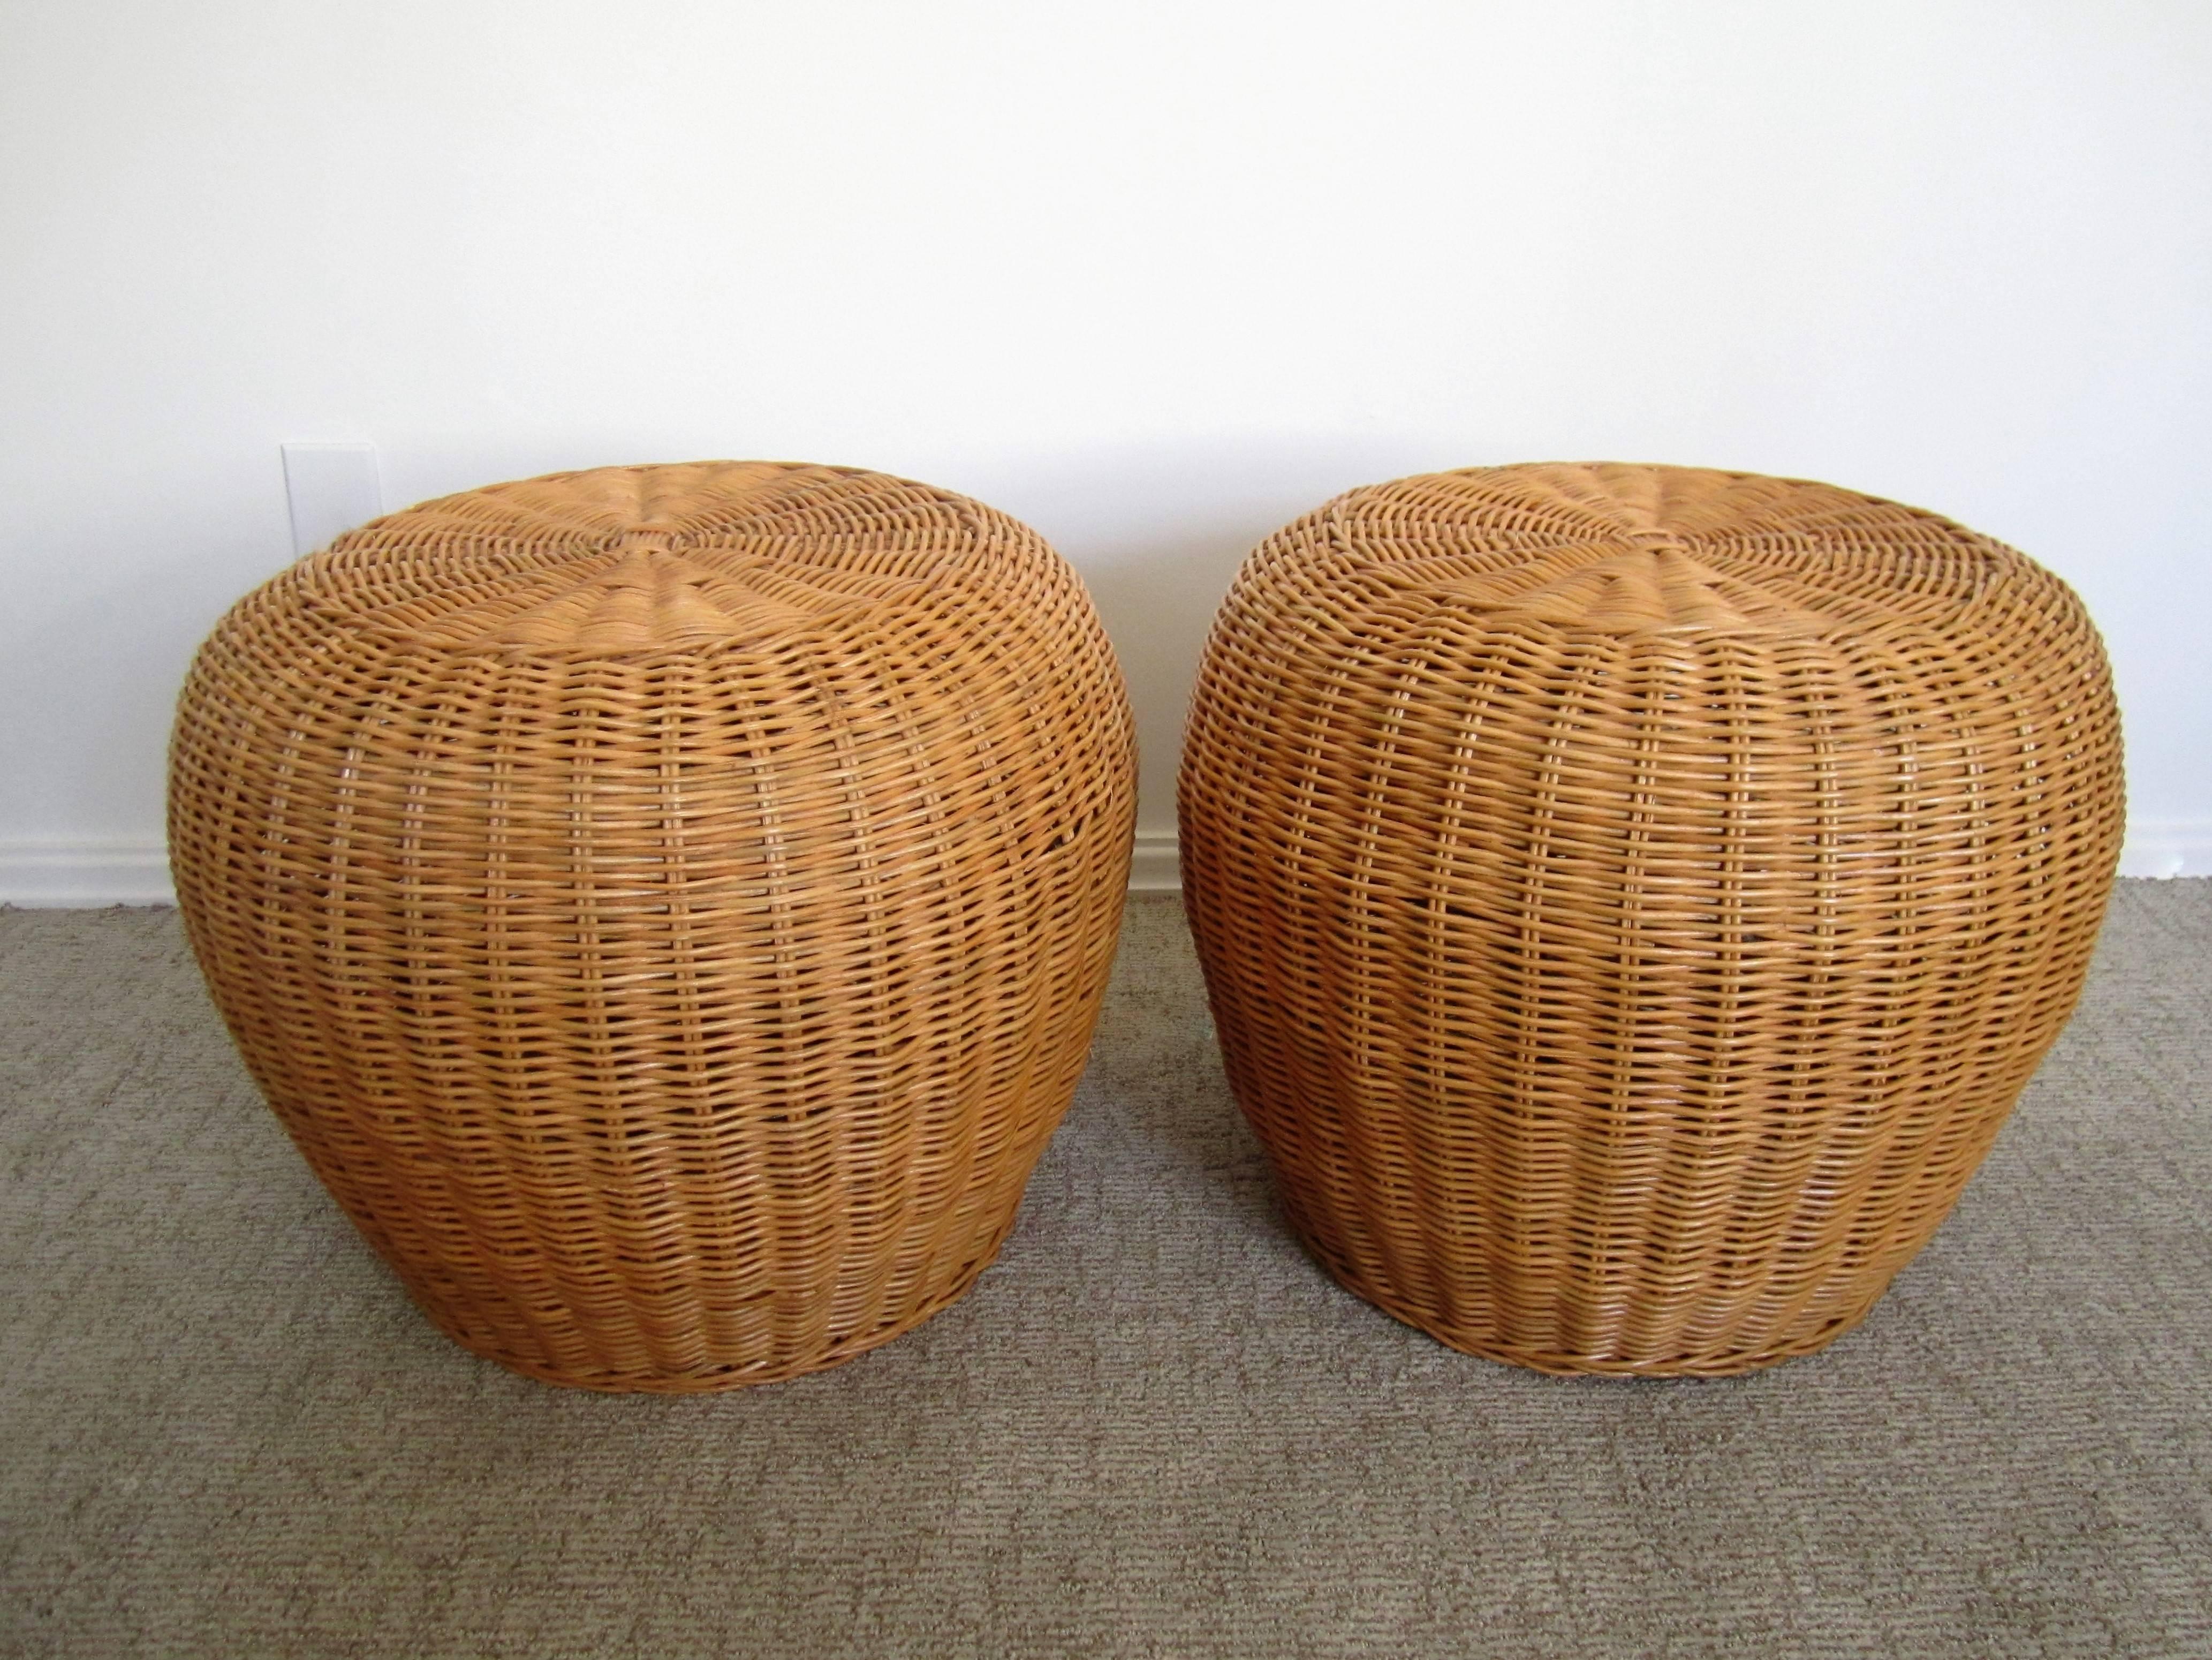 Rattan Vintage European Wicker Benches or Side Tables, 1970s